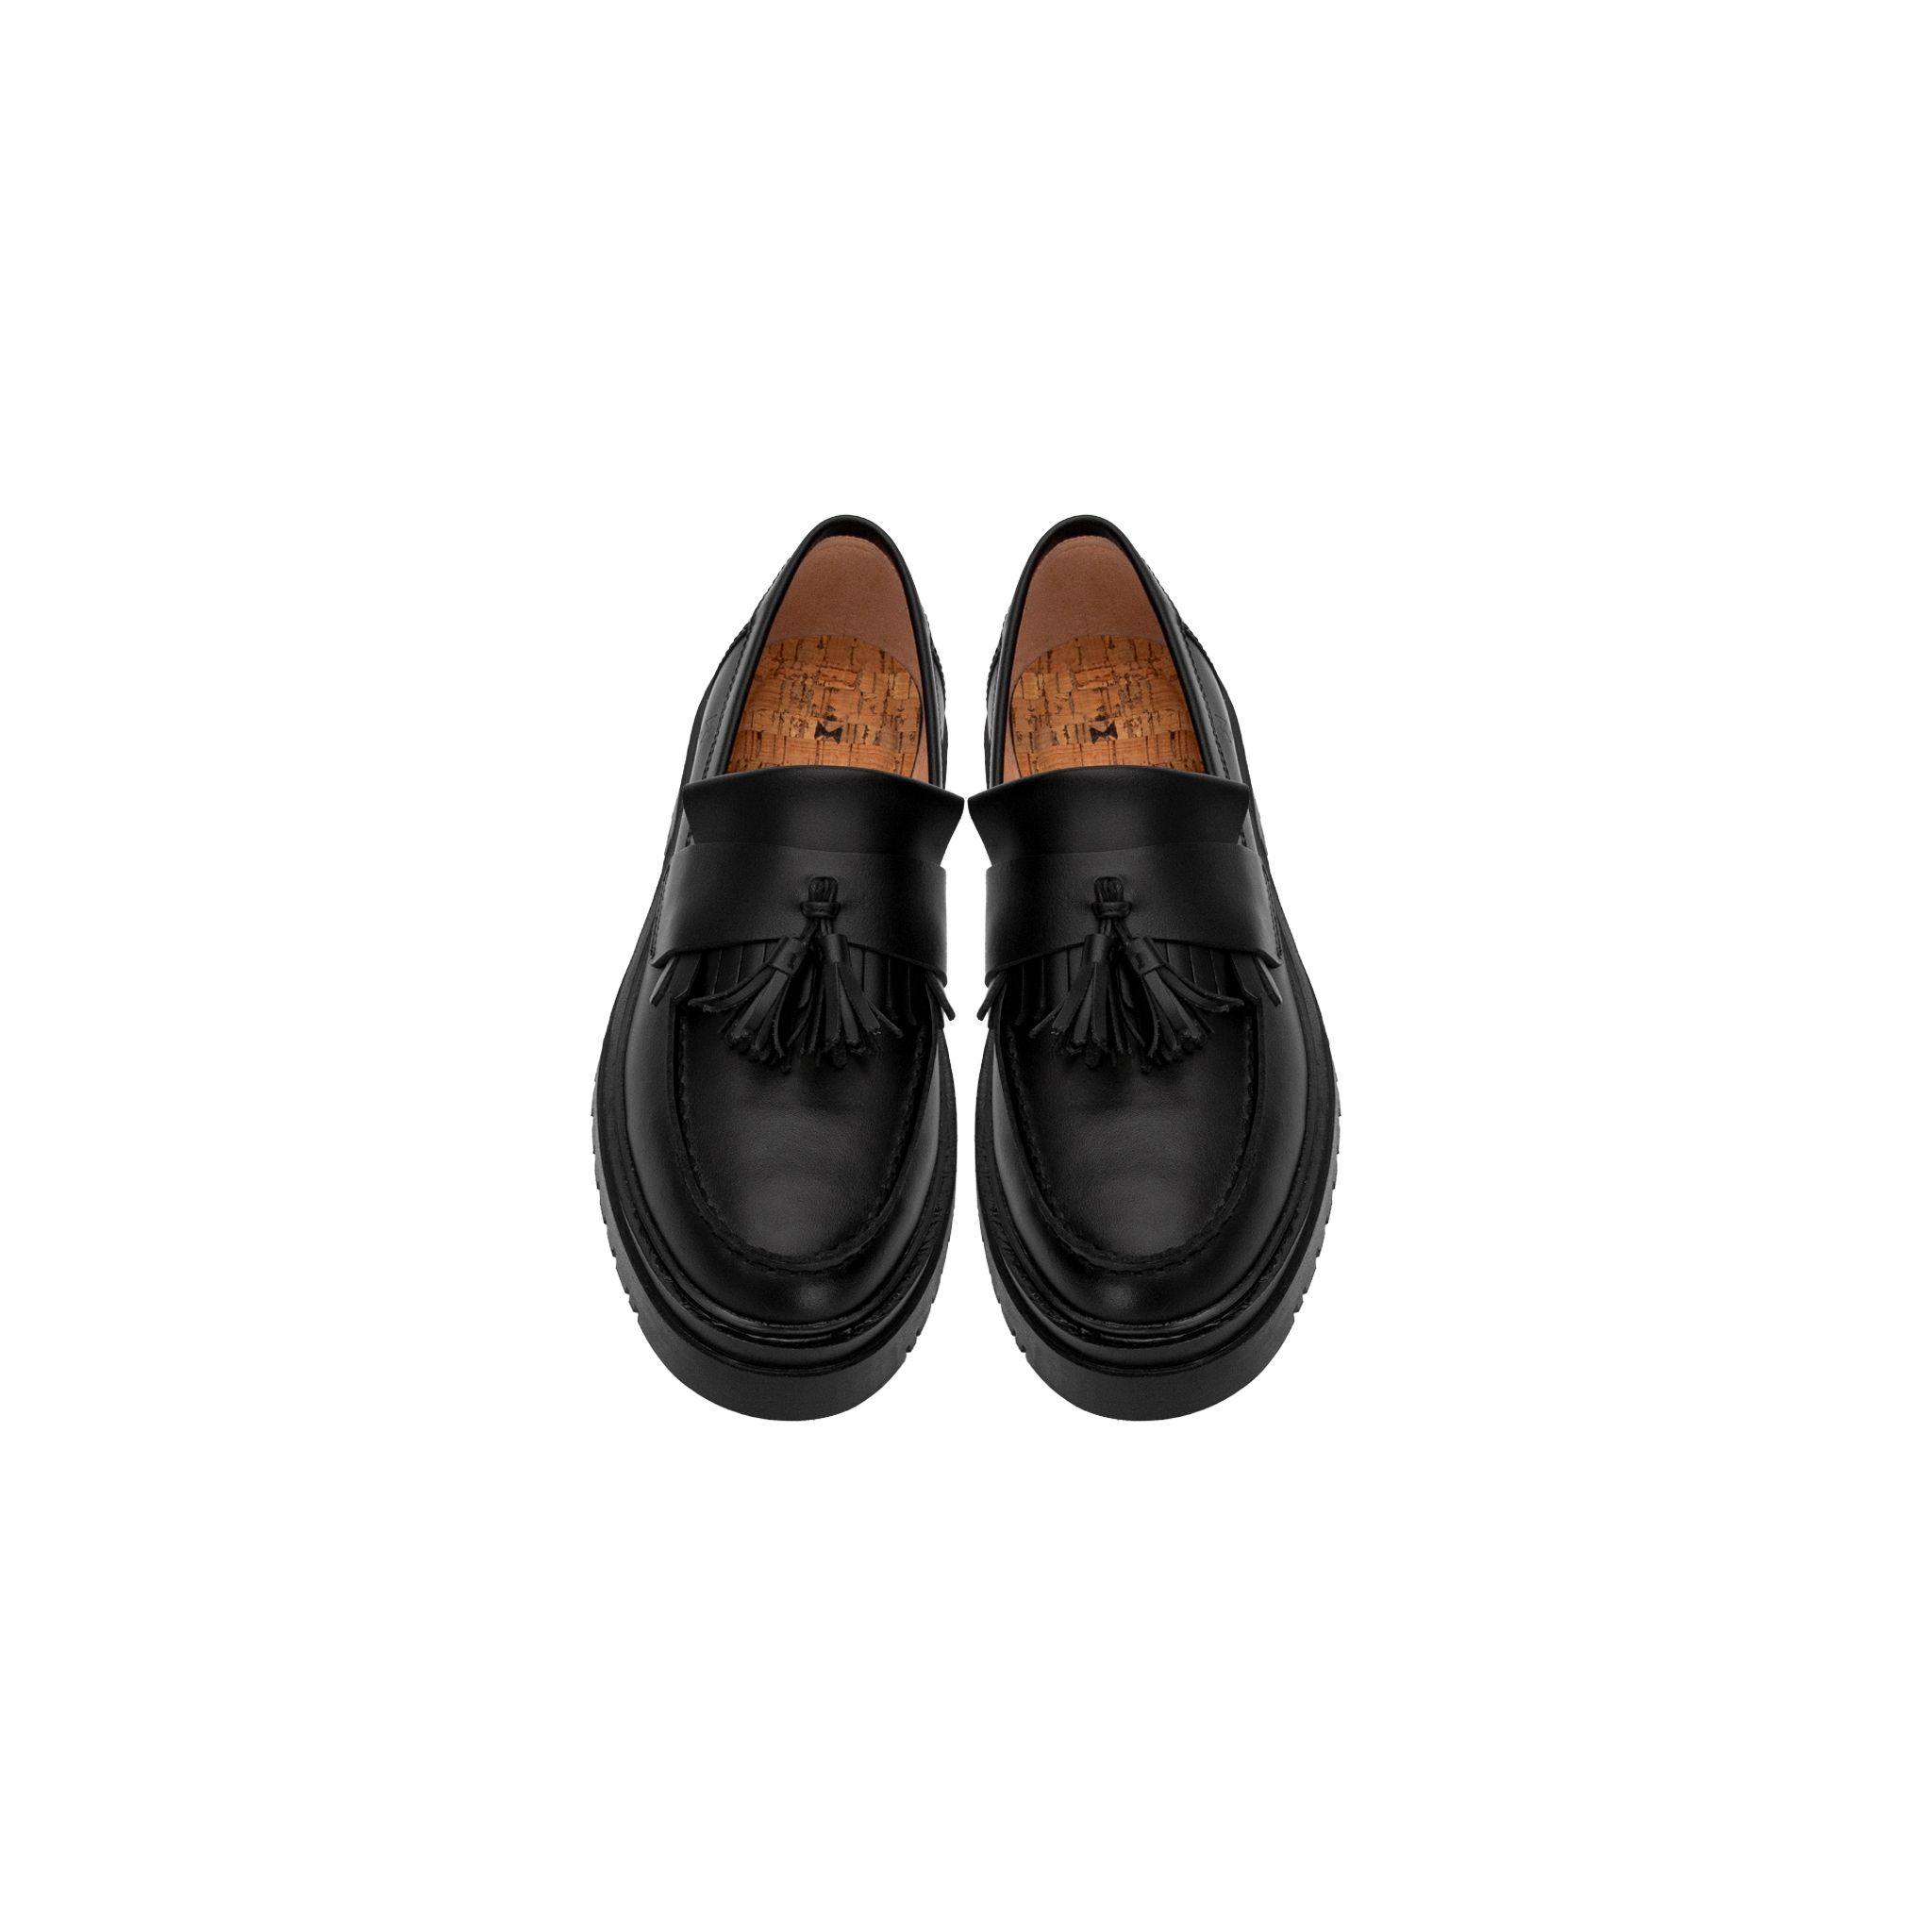  THE LADY WOLF CHUNKY TASSEL LOAFER - BLACK 